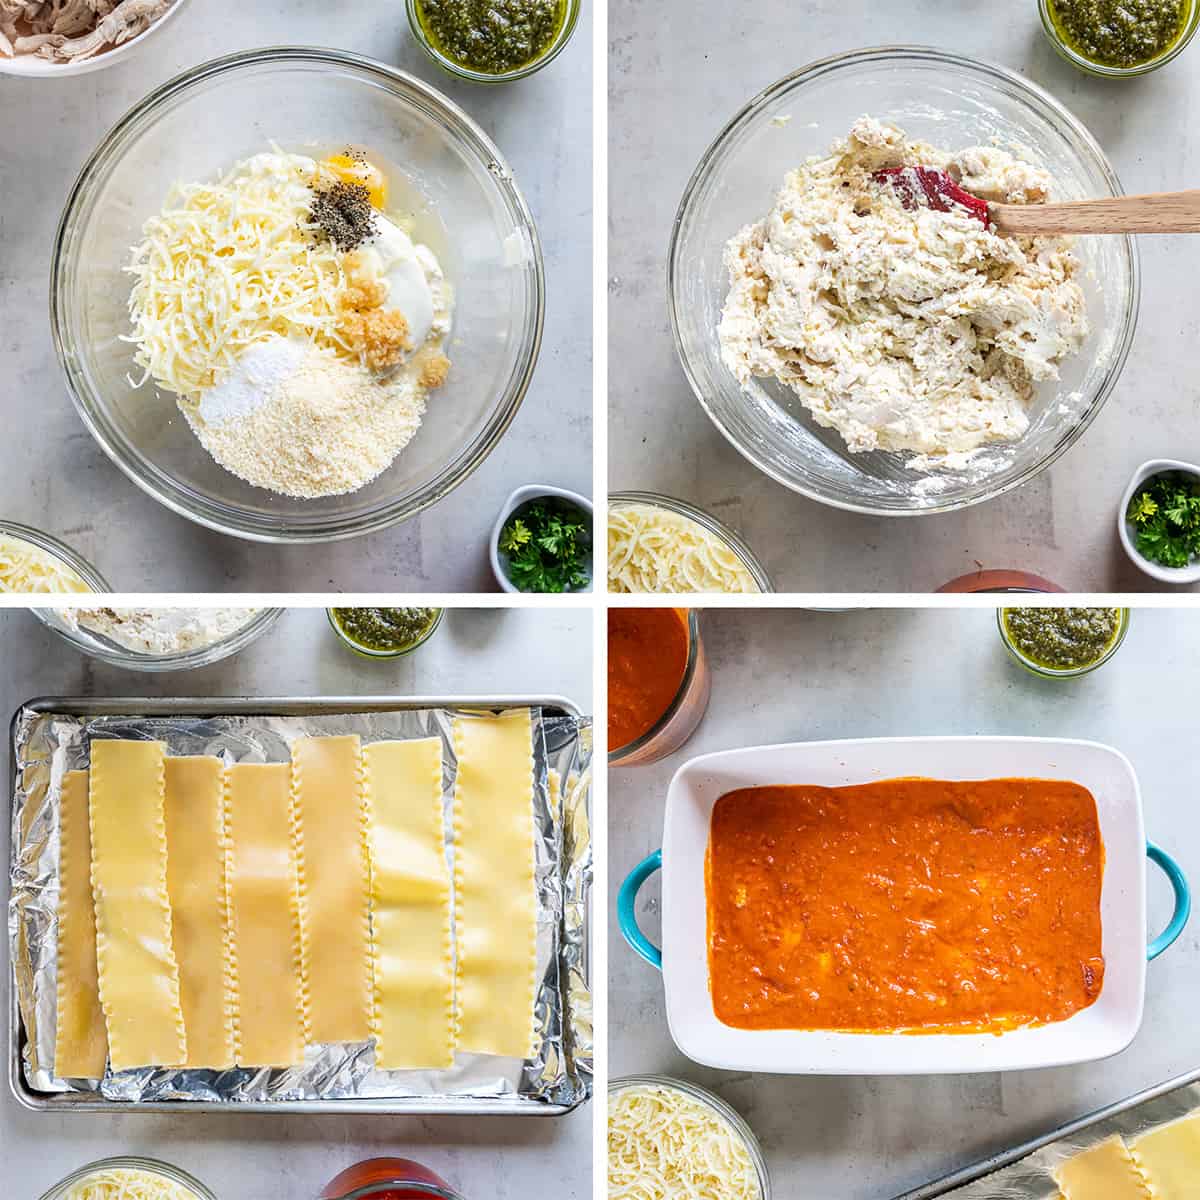 Four images of a ricotta and chicken mixture in a glass bowl, cooked lasagna noodles o a sheet of foil, and sauce coating the bottom of a baking dish.